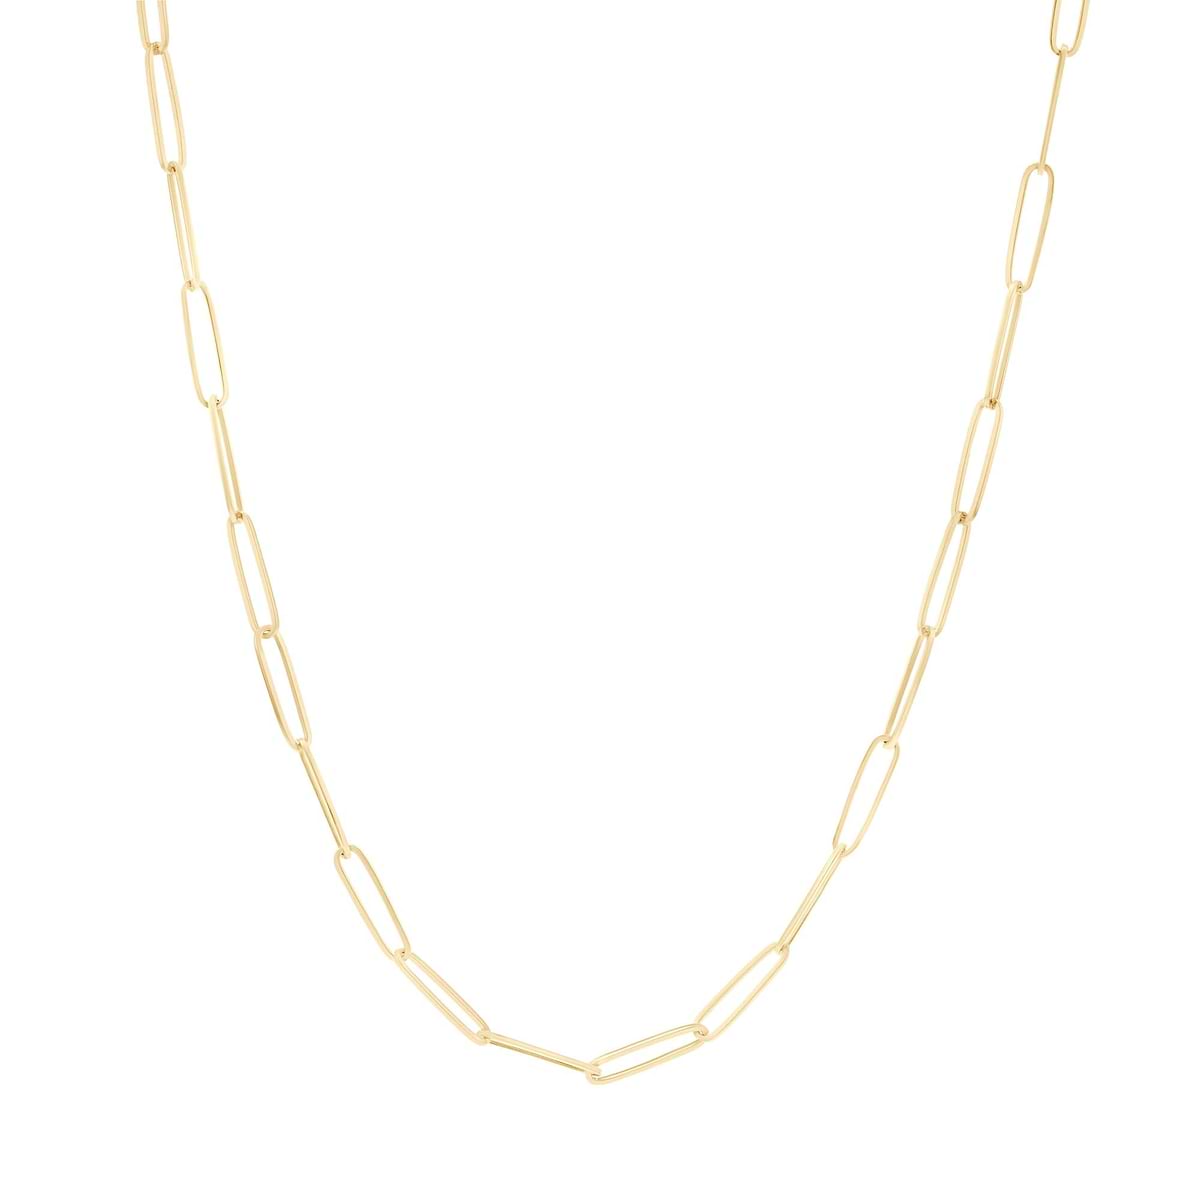 Paperclip Chain Necklace shown in 14K Yellow Gold|paperclip chain link necklace shown in 14k yellow gold 18 inch chain